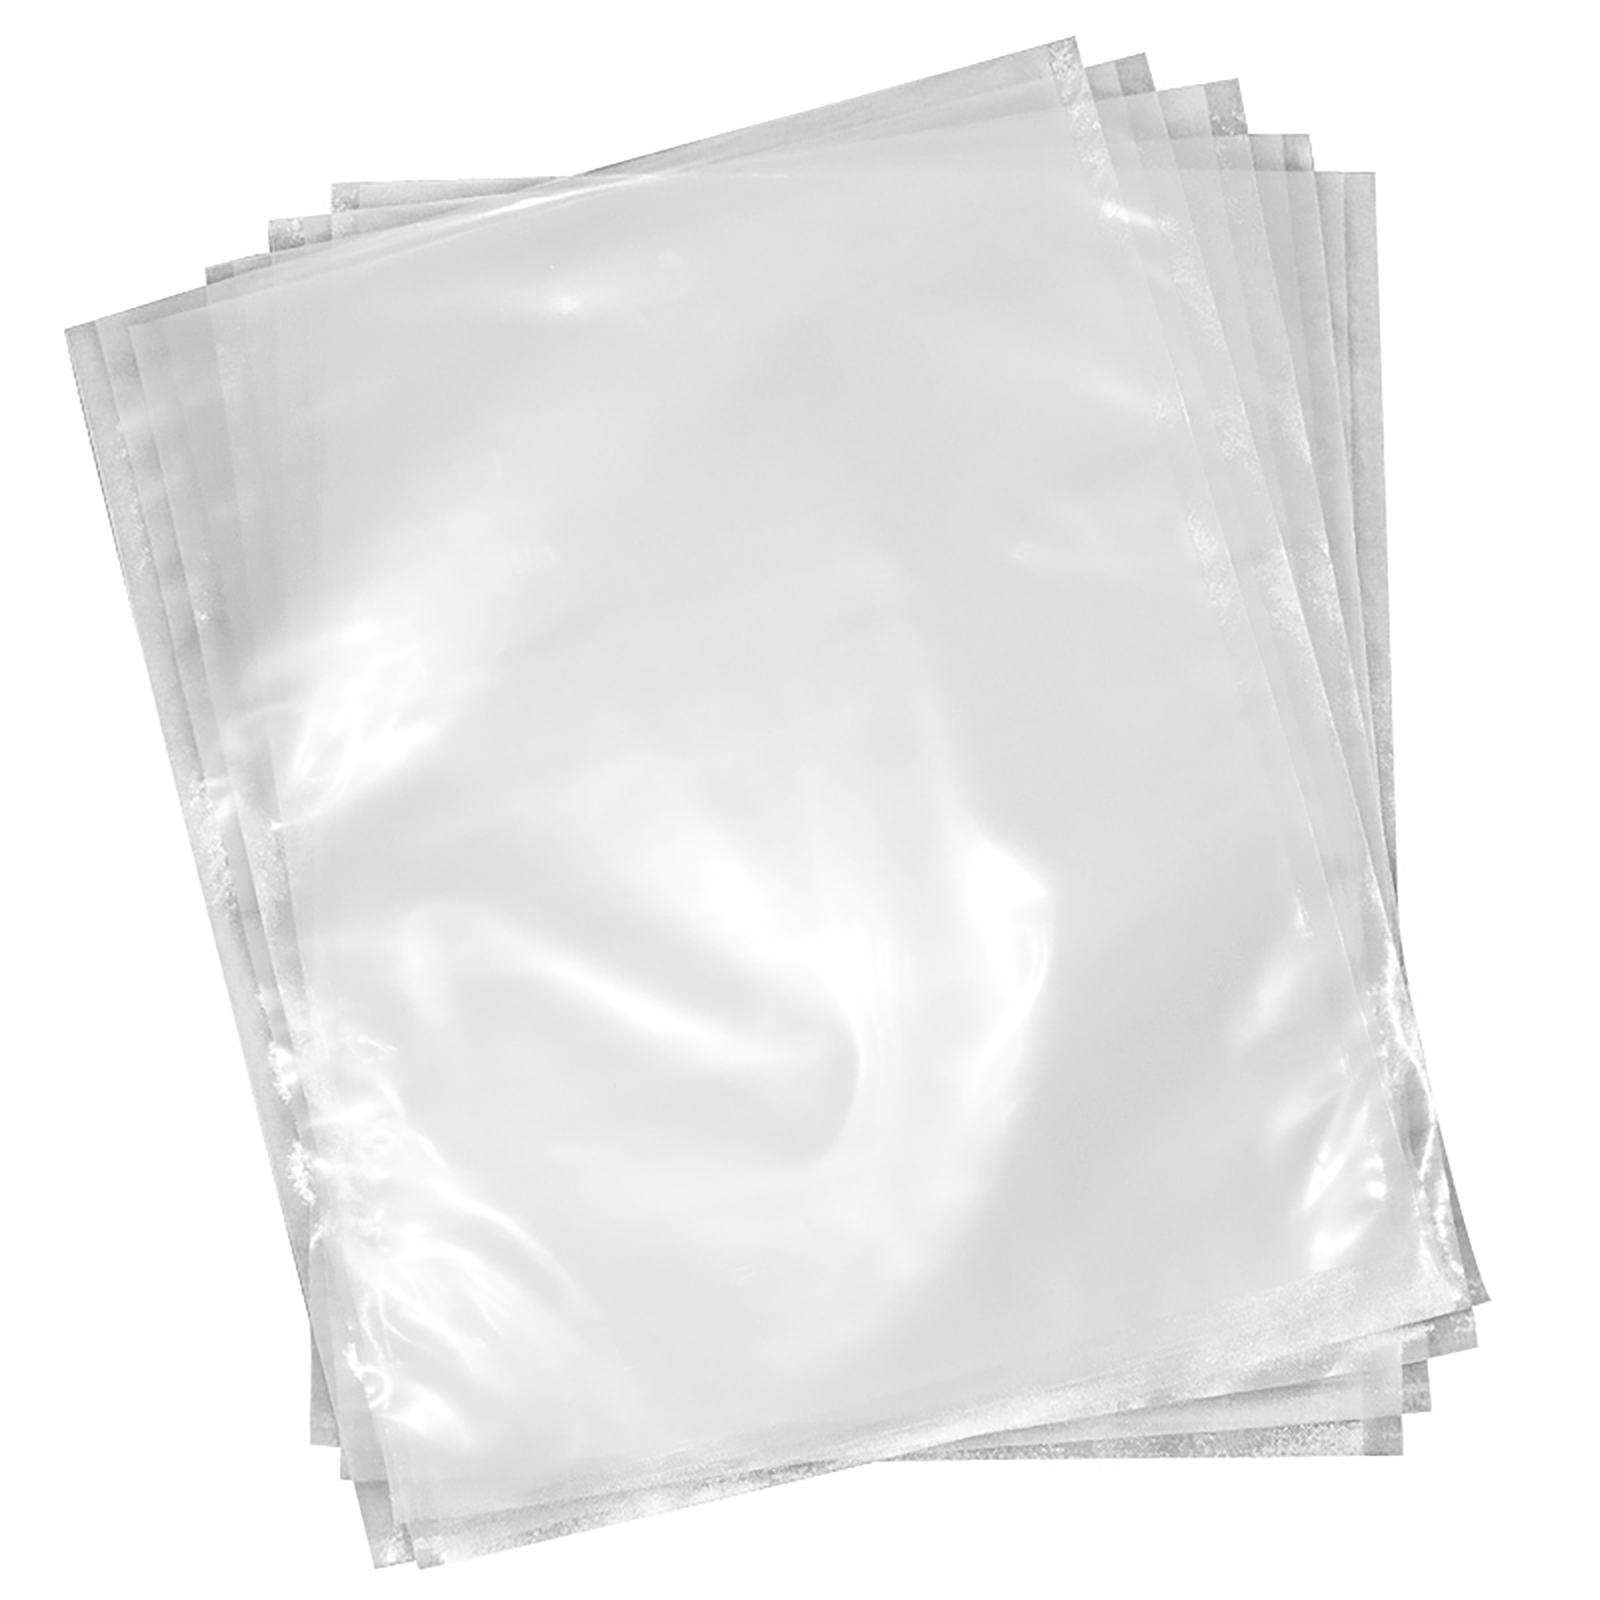 Blank White Aluminium Foil Plastic Pouch Bag Sachet Packaging Mockup  Isolated on White Background Stock Photo - Image of pack, empty: 239508822